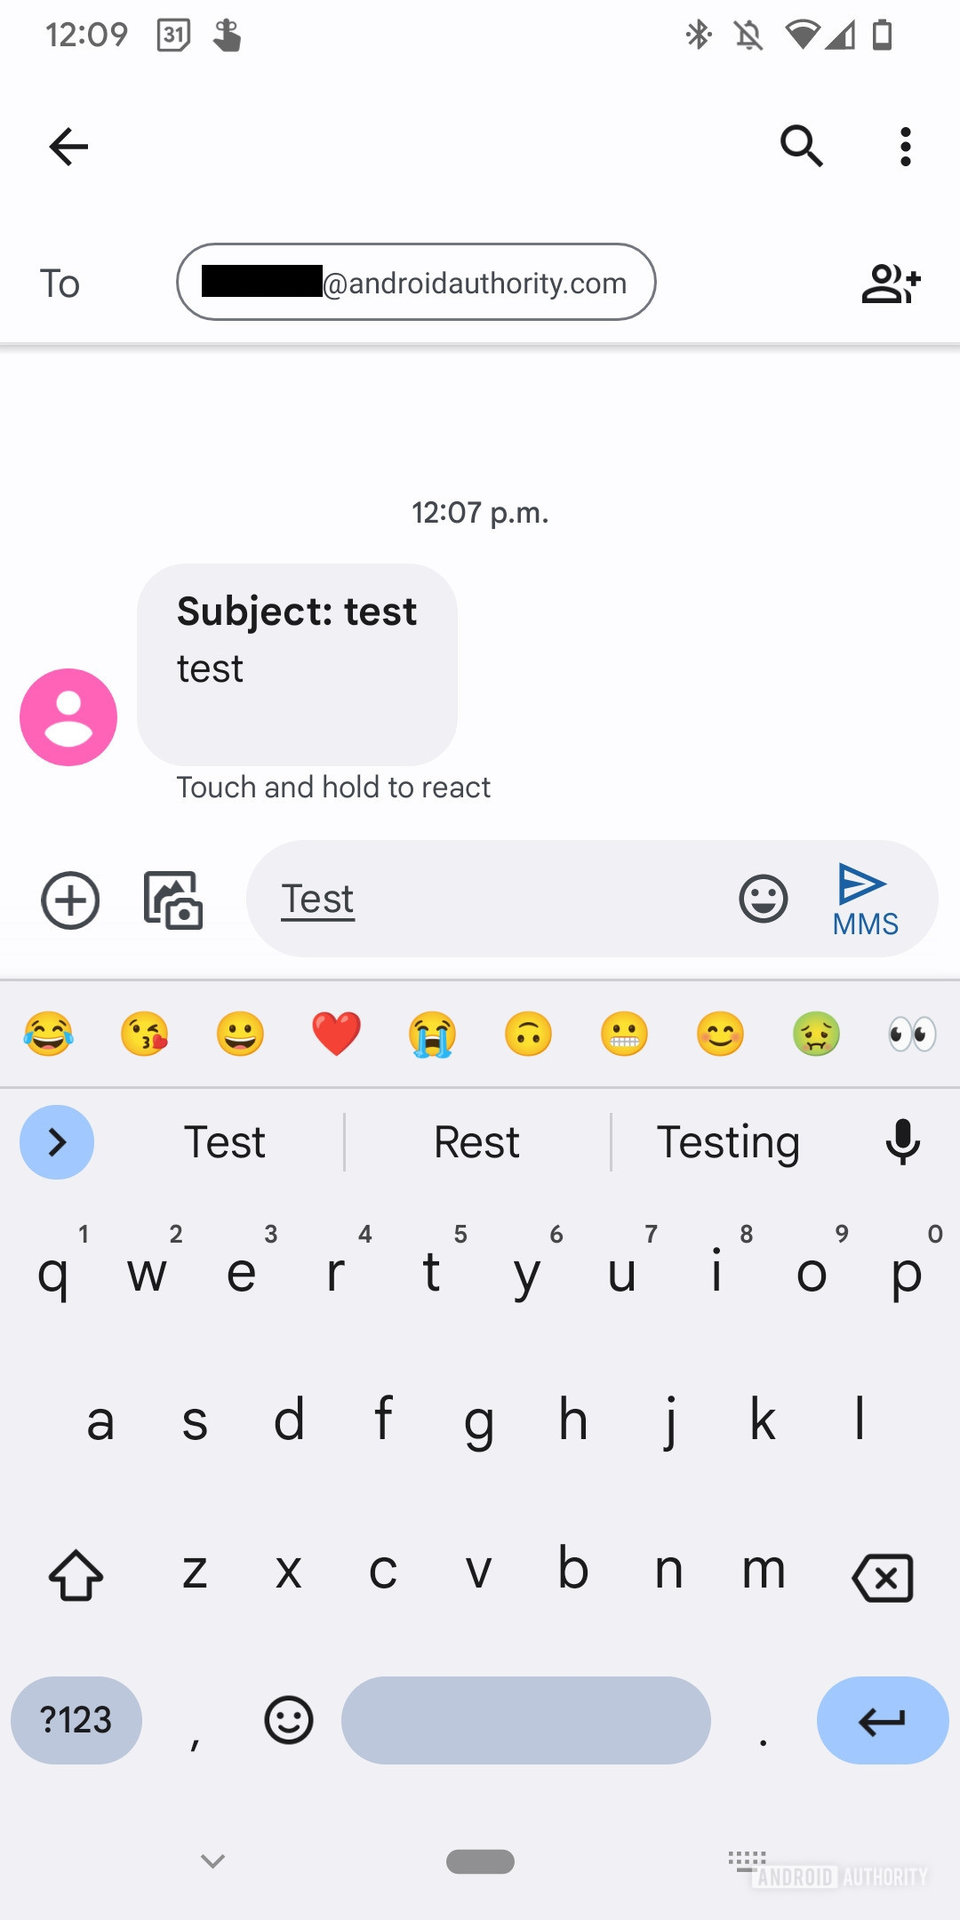 A screenshot of the Android text messaging app showing a conversation with an email address.